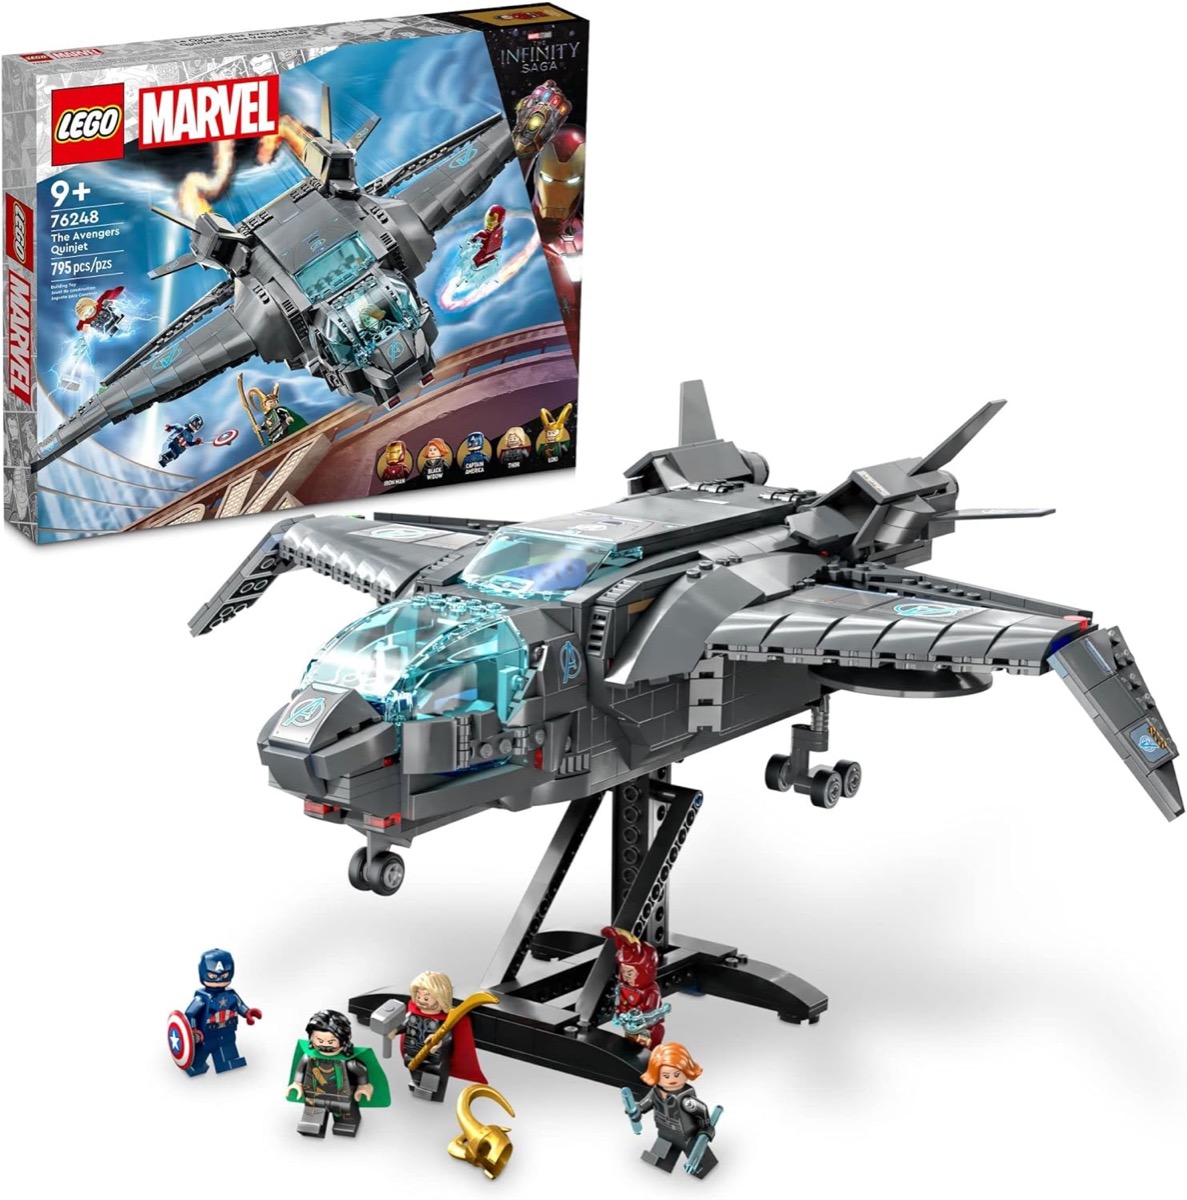 A LEGO version of the Avengers' Quinjet on a stand